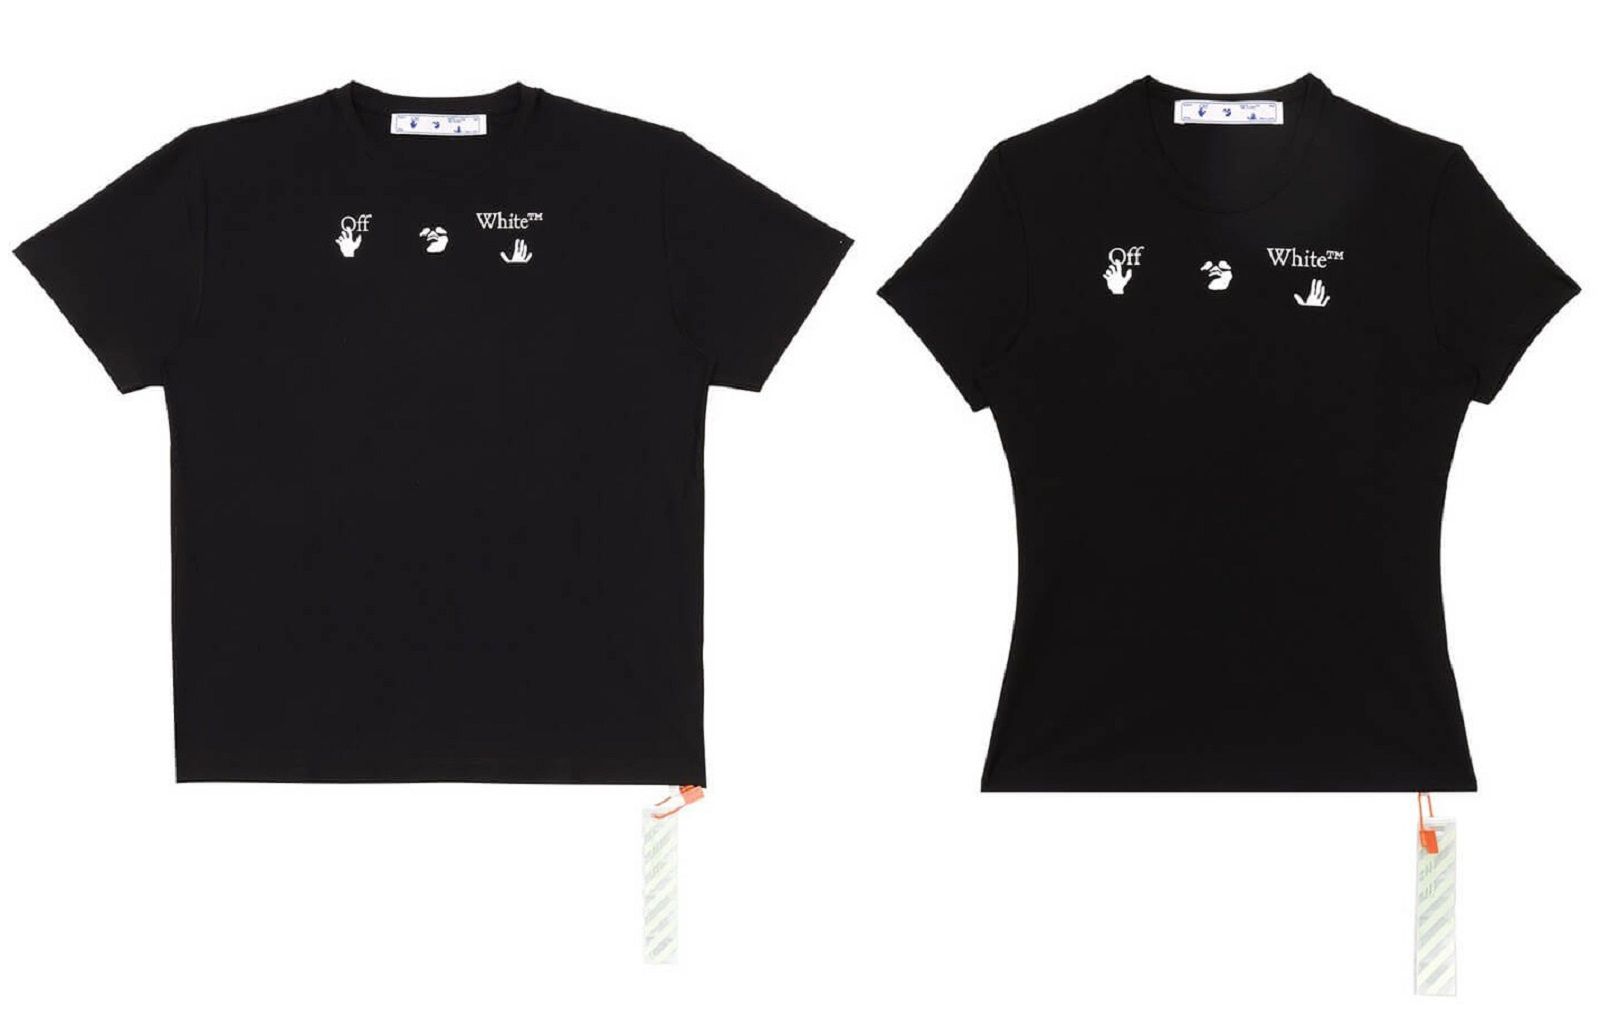 Off-White unveils the NEW LOGO T-SHIRT